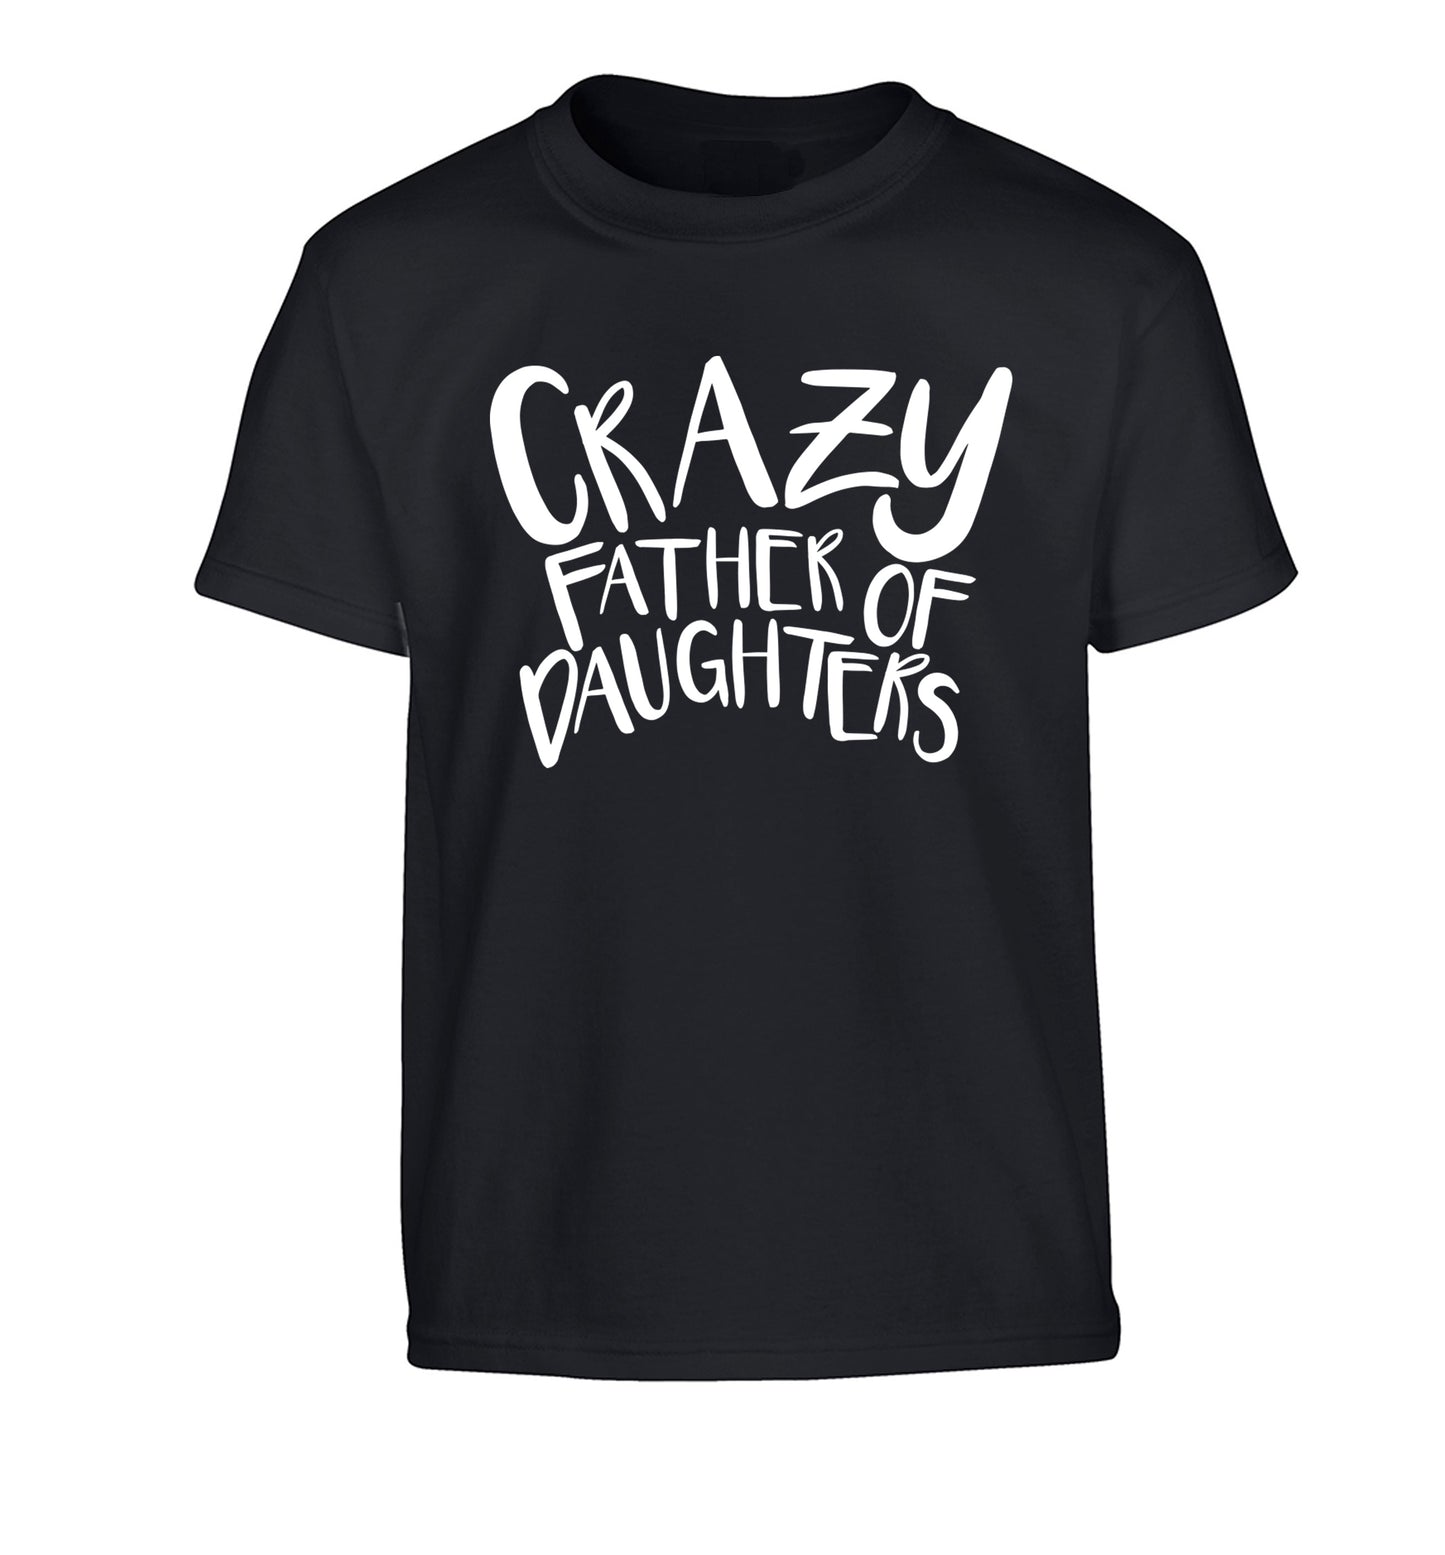 Crazy father of daughters Children's black Tshirt 12-13 Years